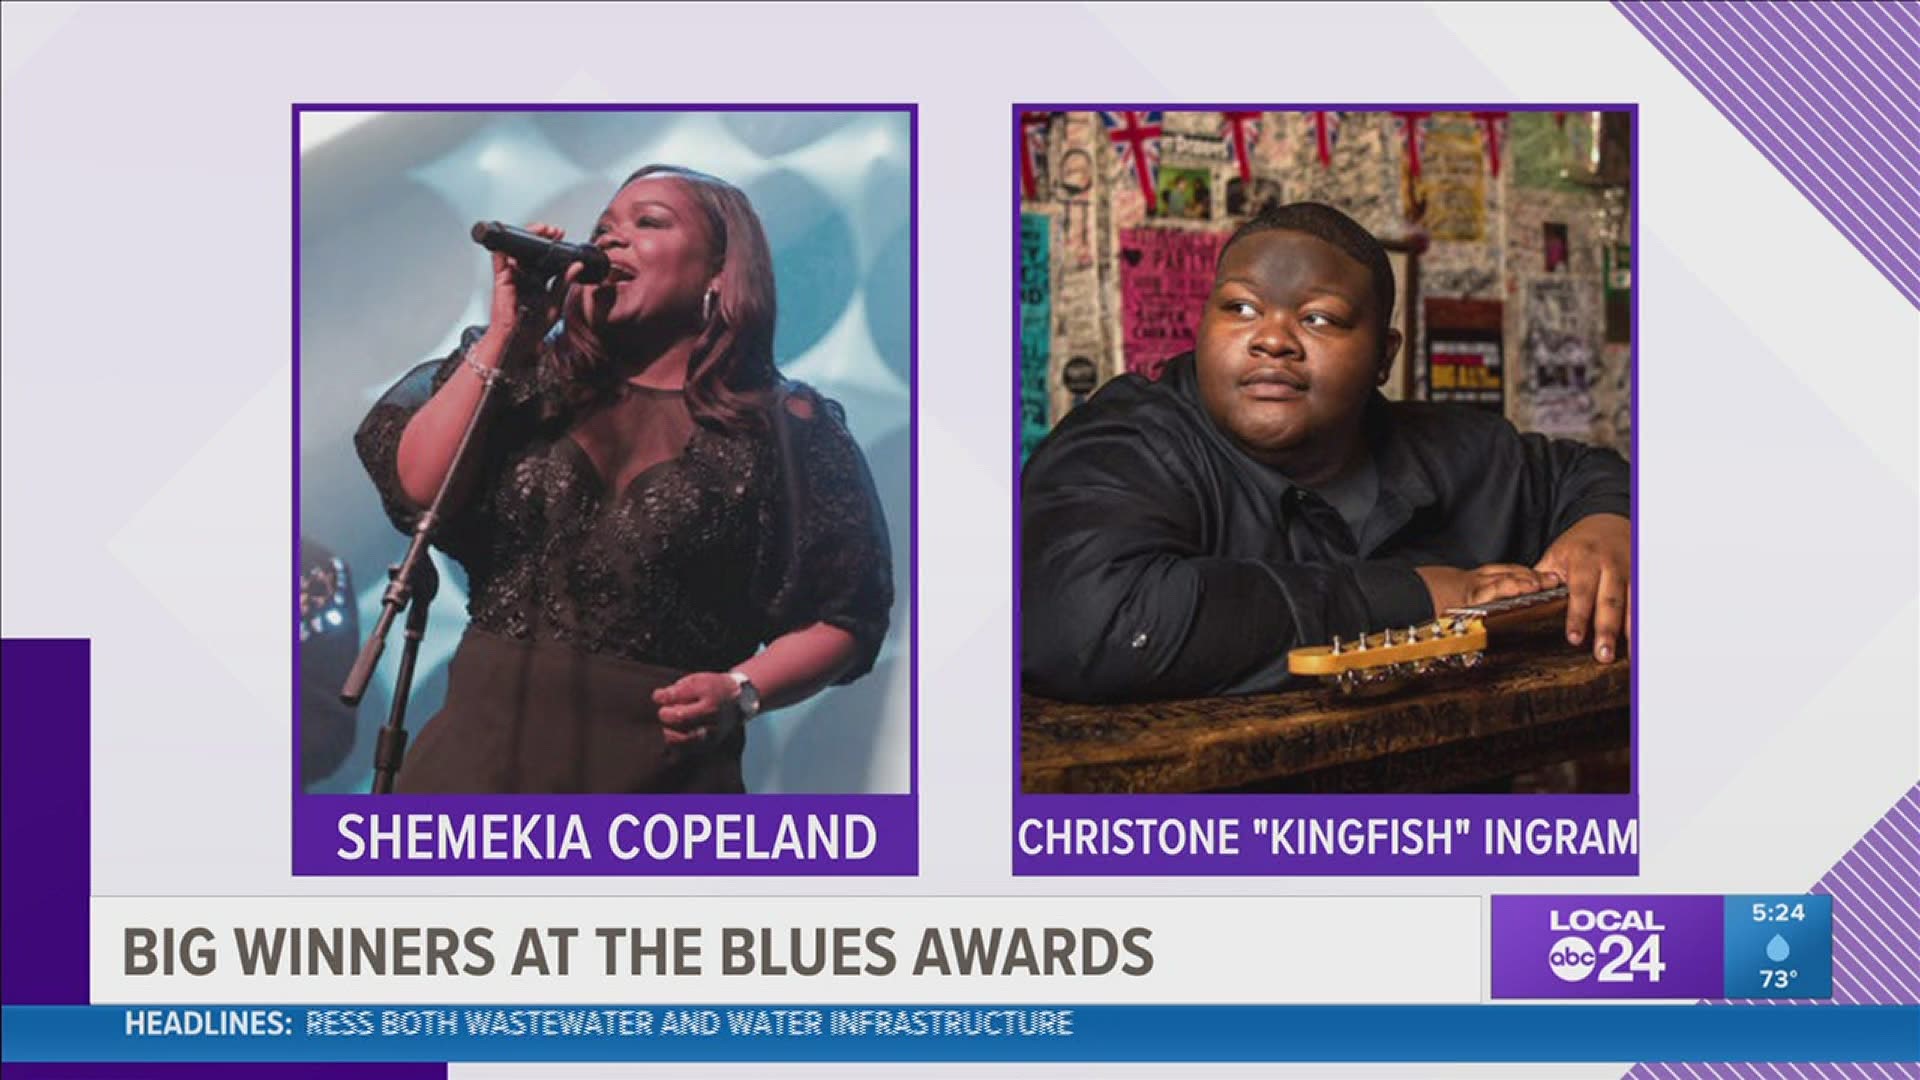 Copeland won the B.B. King Entertainer of the Year award, the show's top honor.